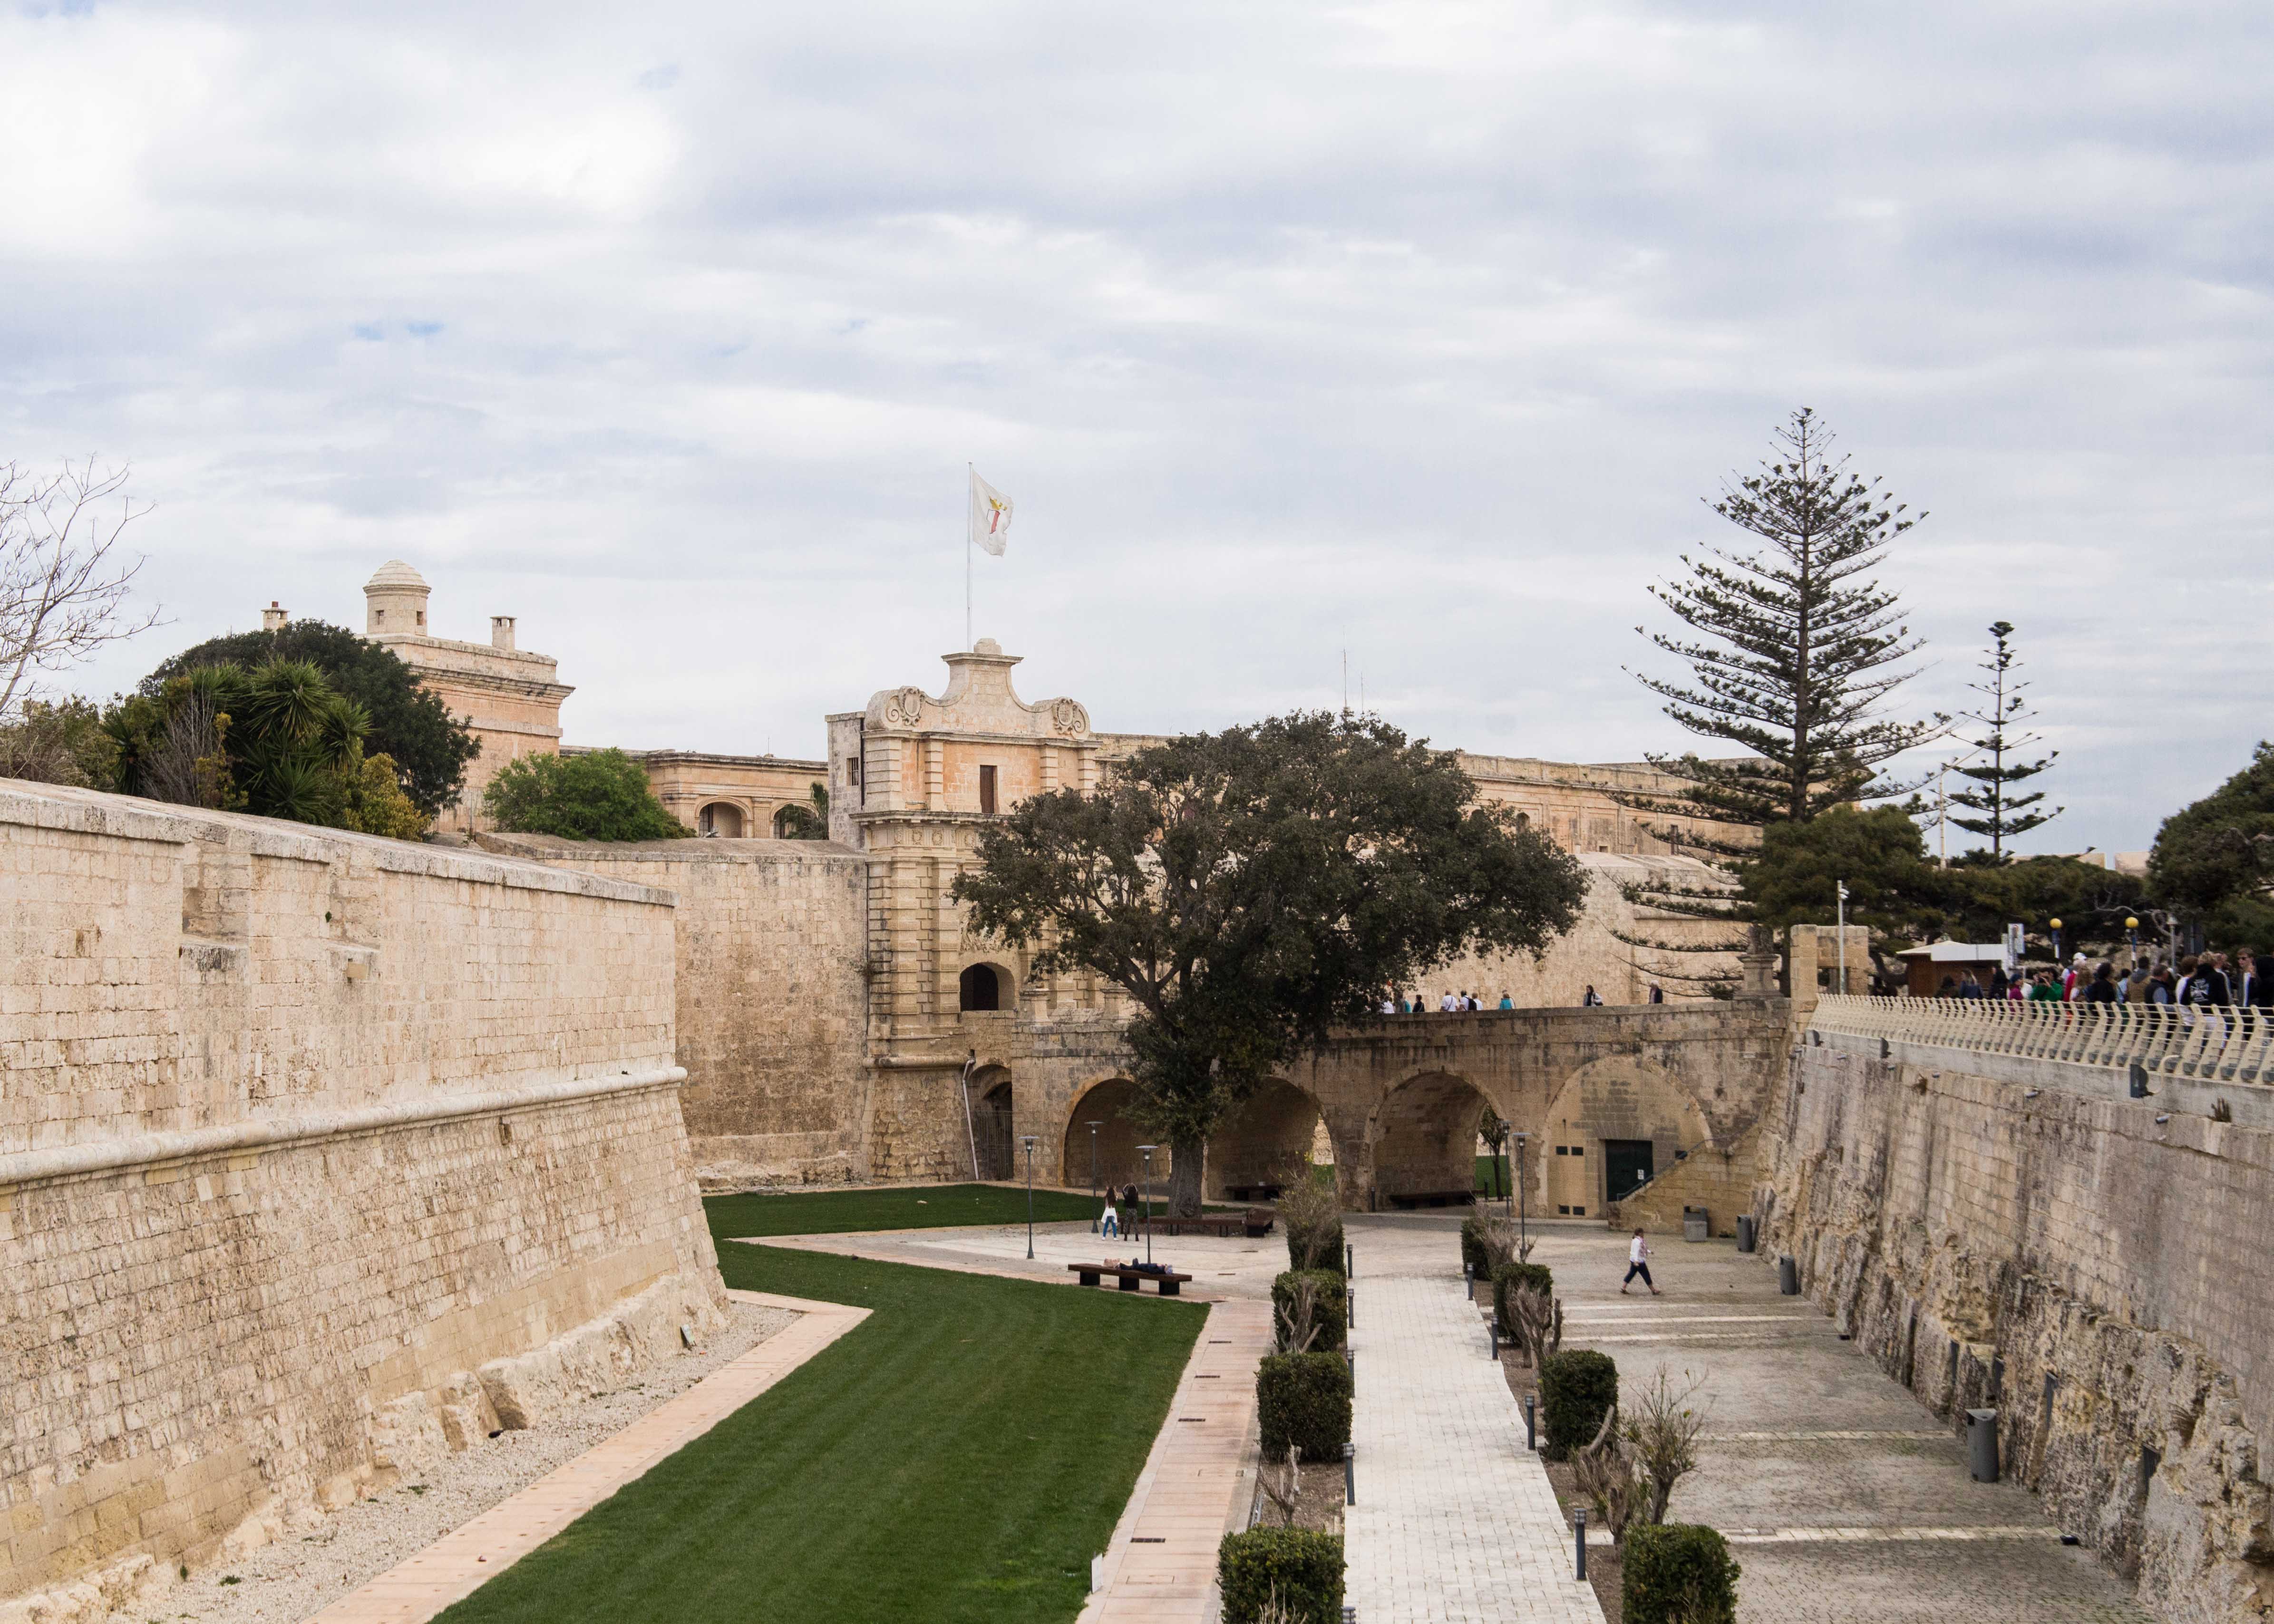 Mdina, The King's Gate, Game of Thrones inspiration